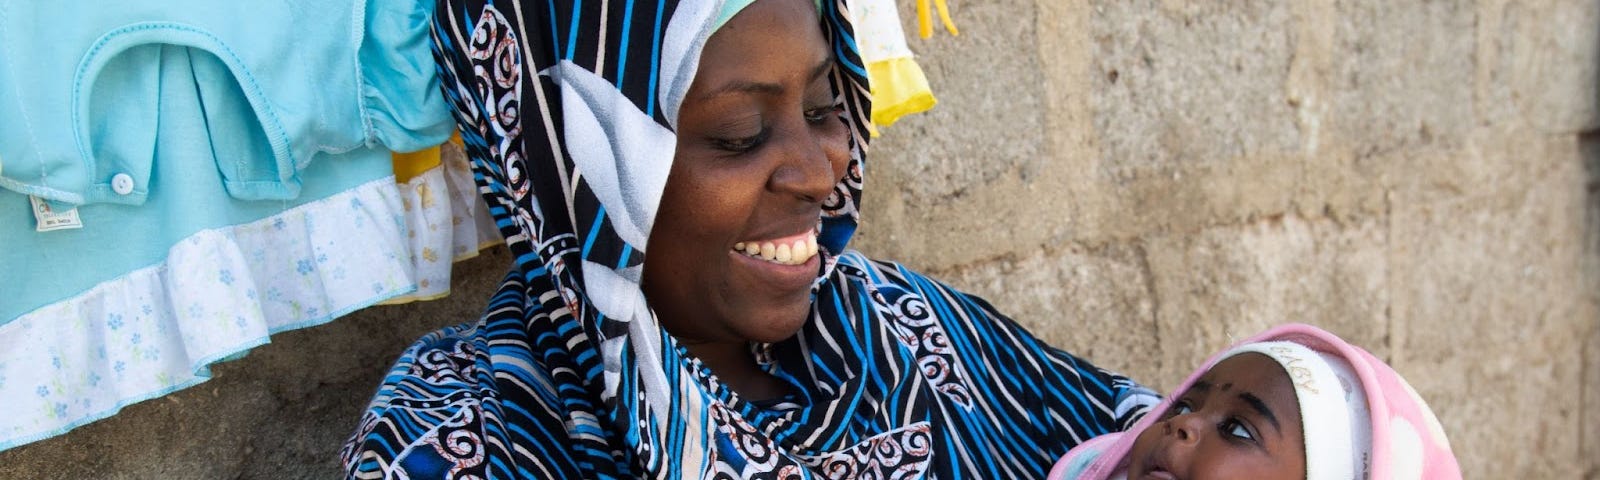 Miza Juma Juma, a new mom in Tanzania, smiles lovingly at her newborn baby, Umulayman, who she is cradling in her arms.